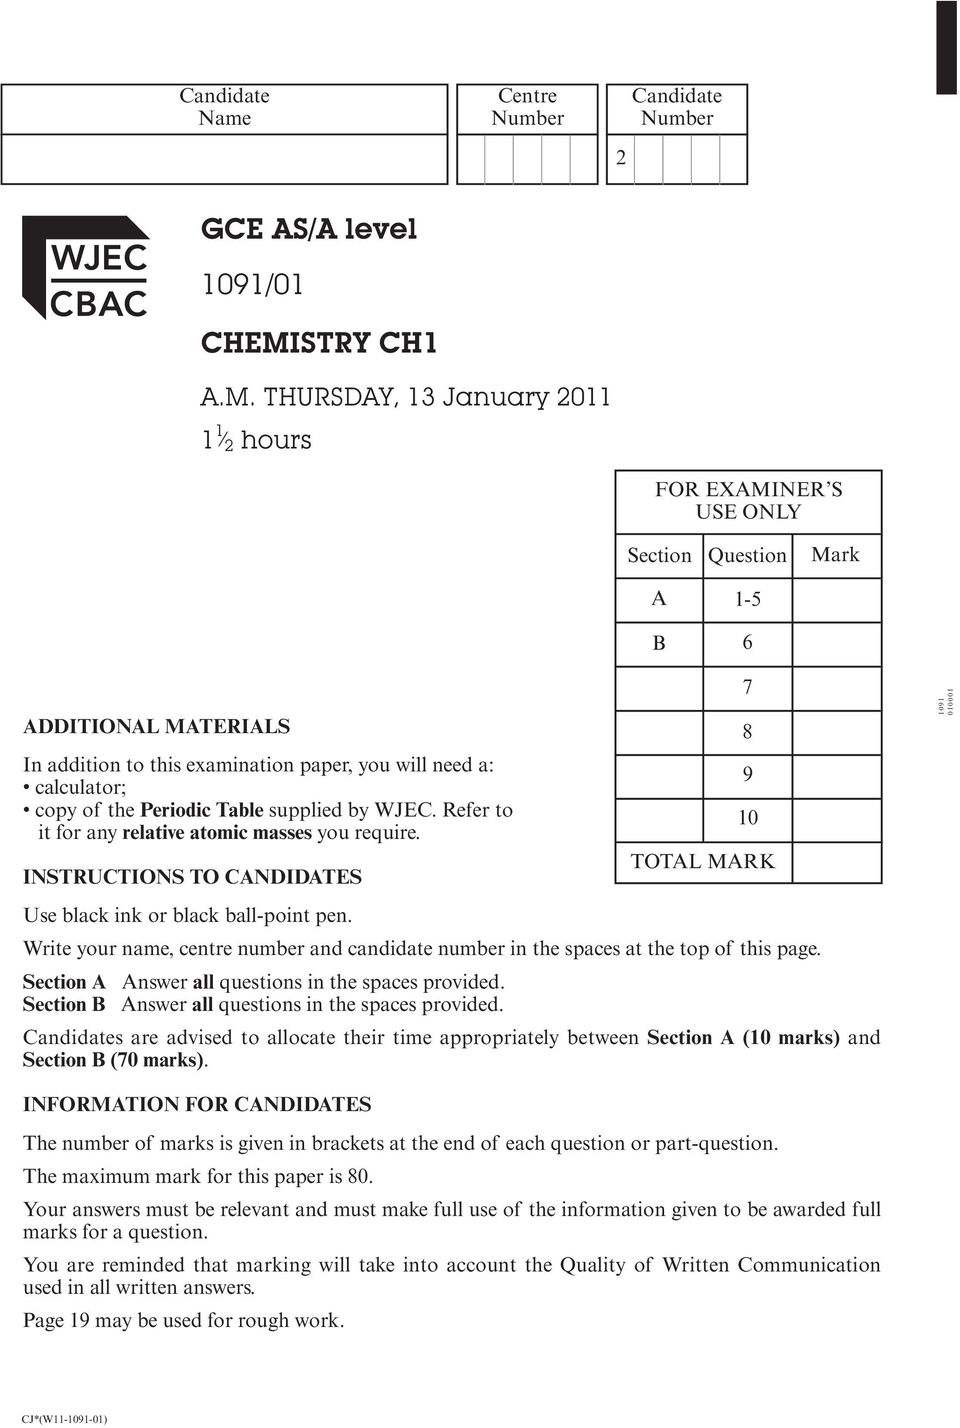 THURSDAY, 13 January 2011 1 1 2 hours FOR EXAMINER S USE ONLY Section A B Question 1-5 6 Mark ADDITIONAL MATERIALS In addition to this examination paper, you will need a: calculator; copy of the